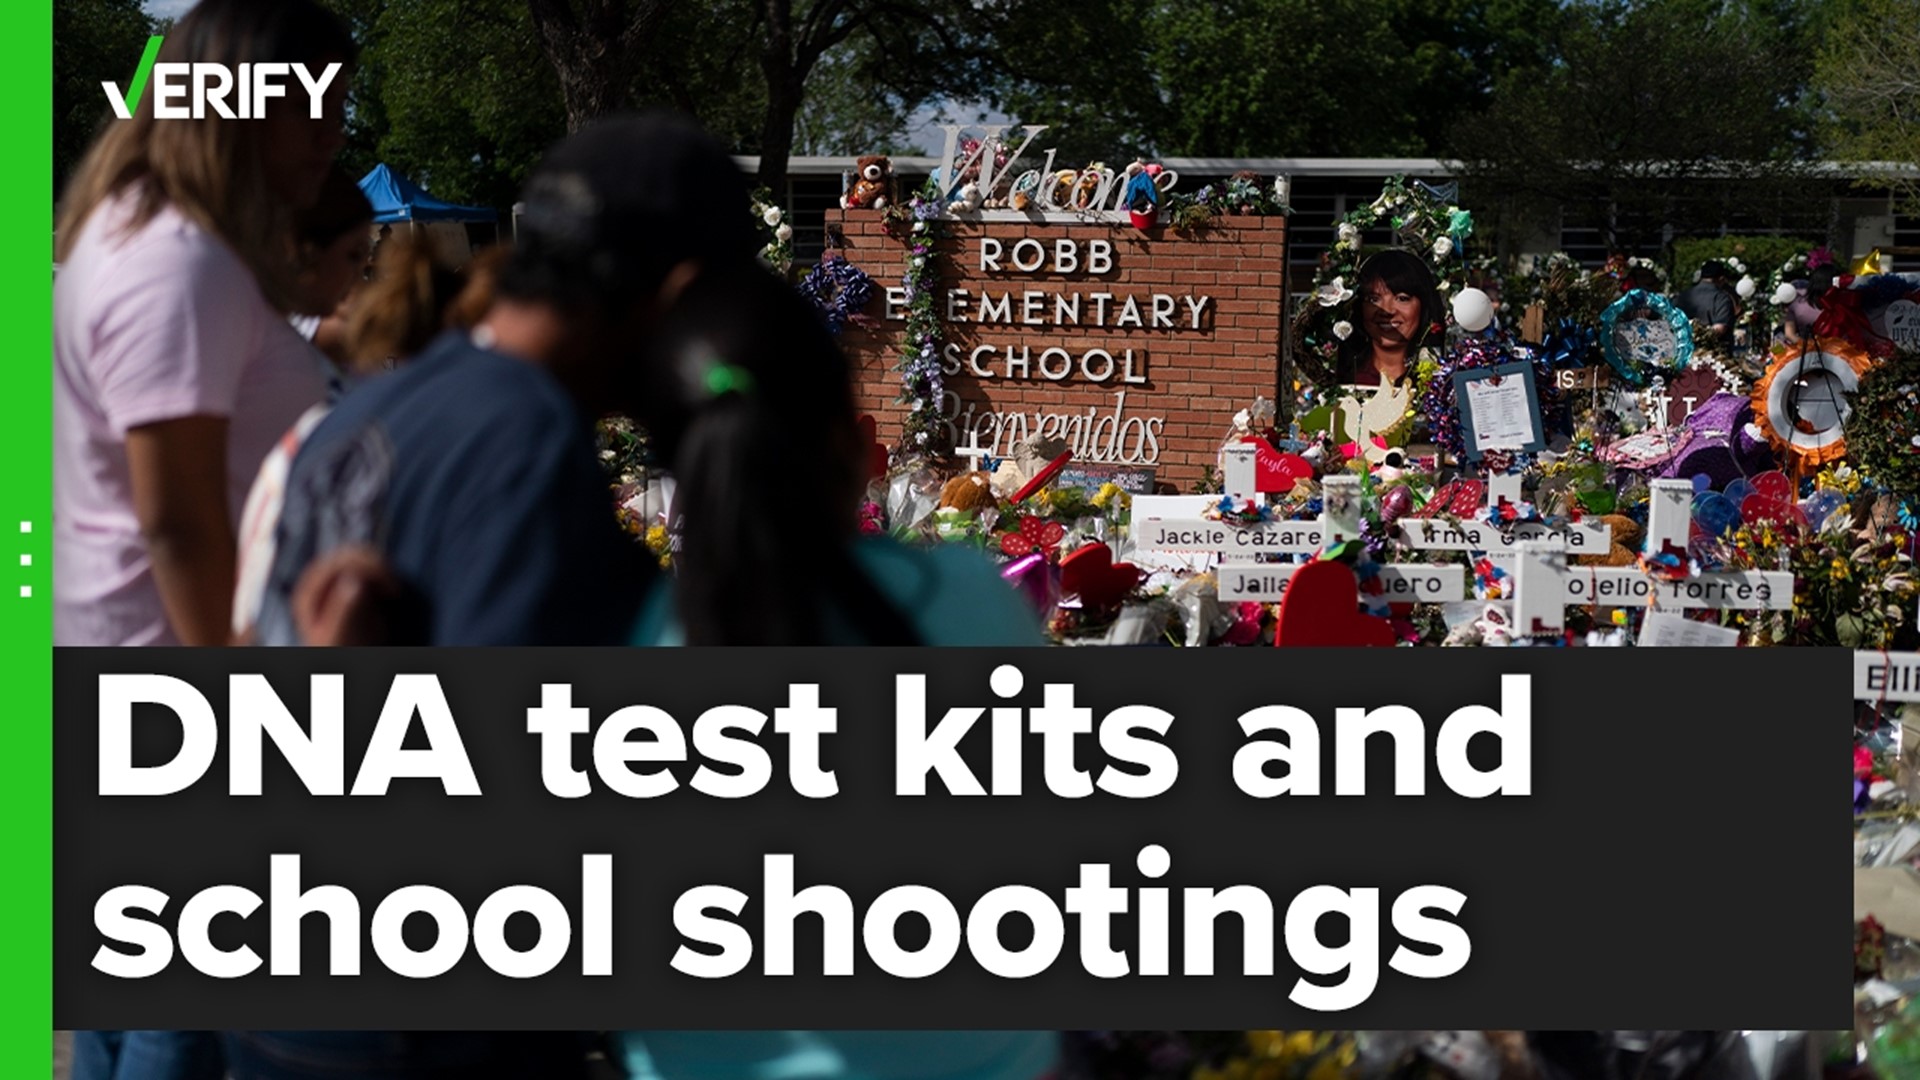 Texas schools are sending DNA kits to parents by request. The state funded them to help find missing children.